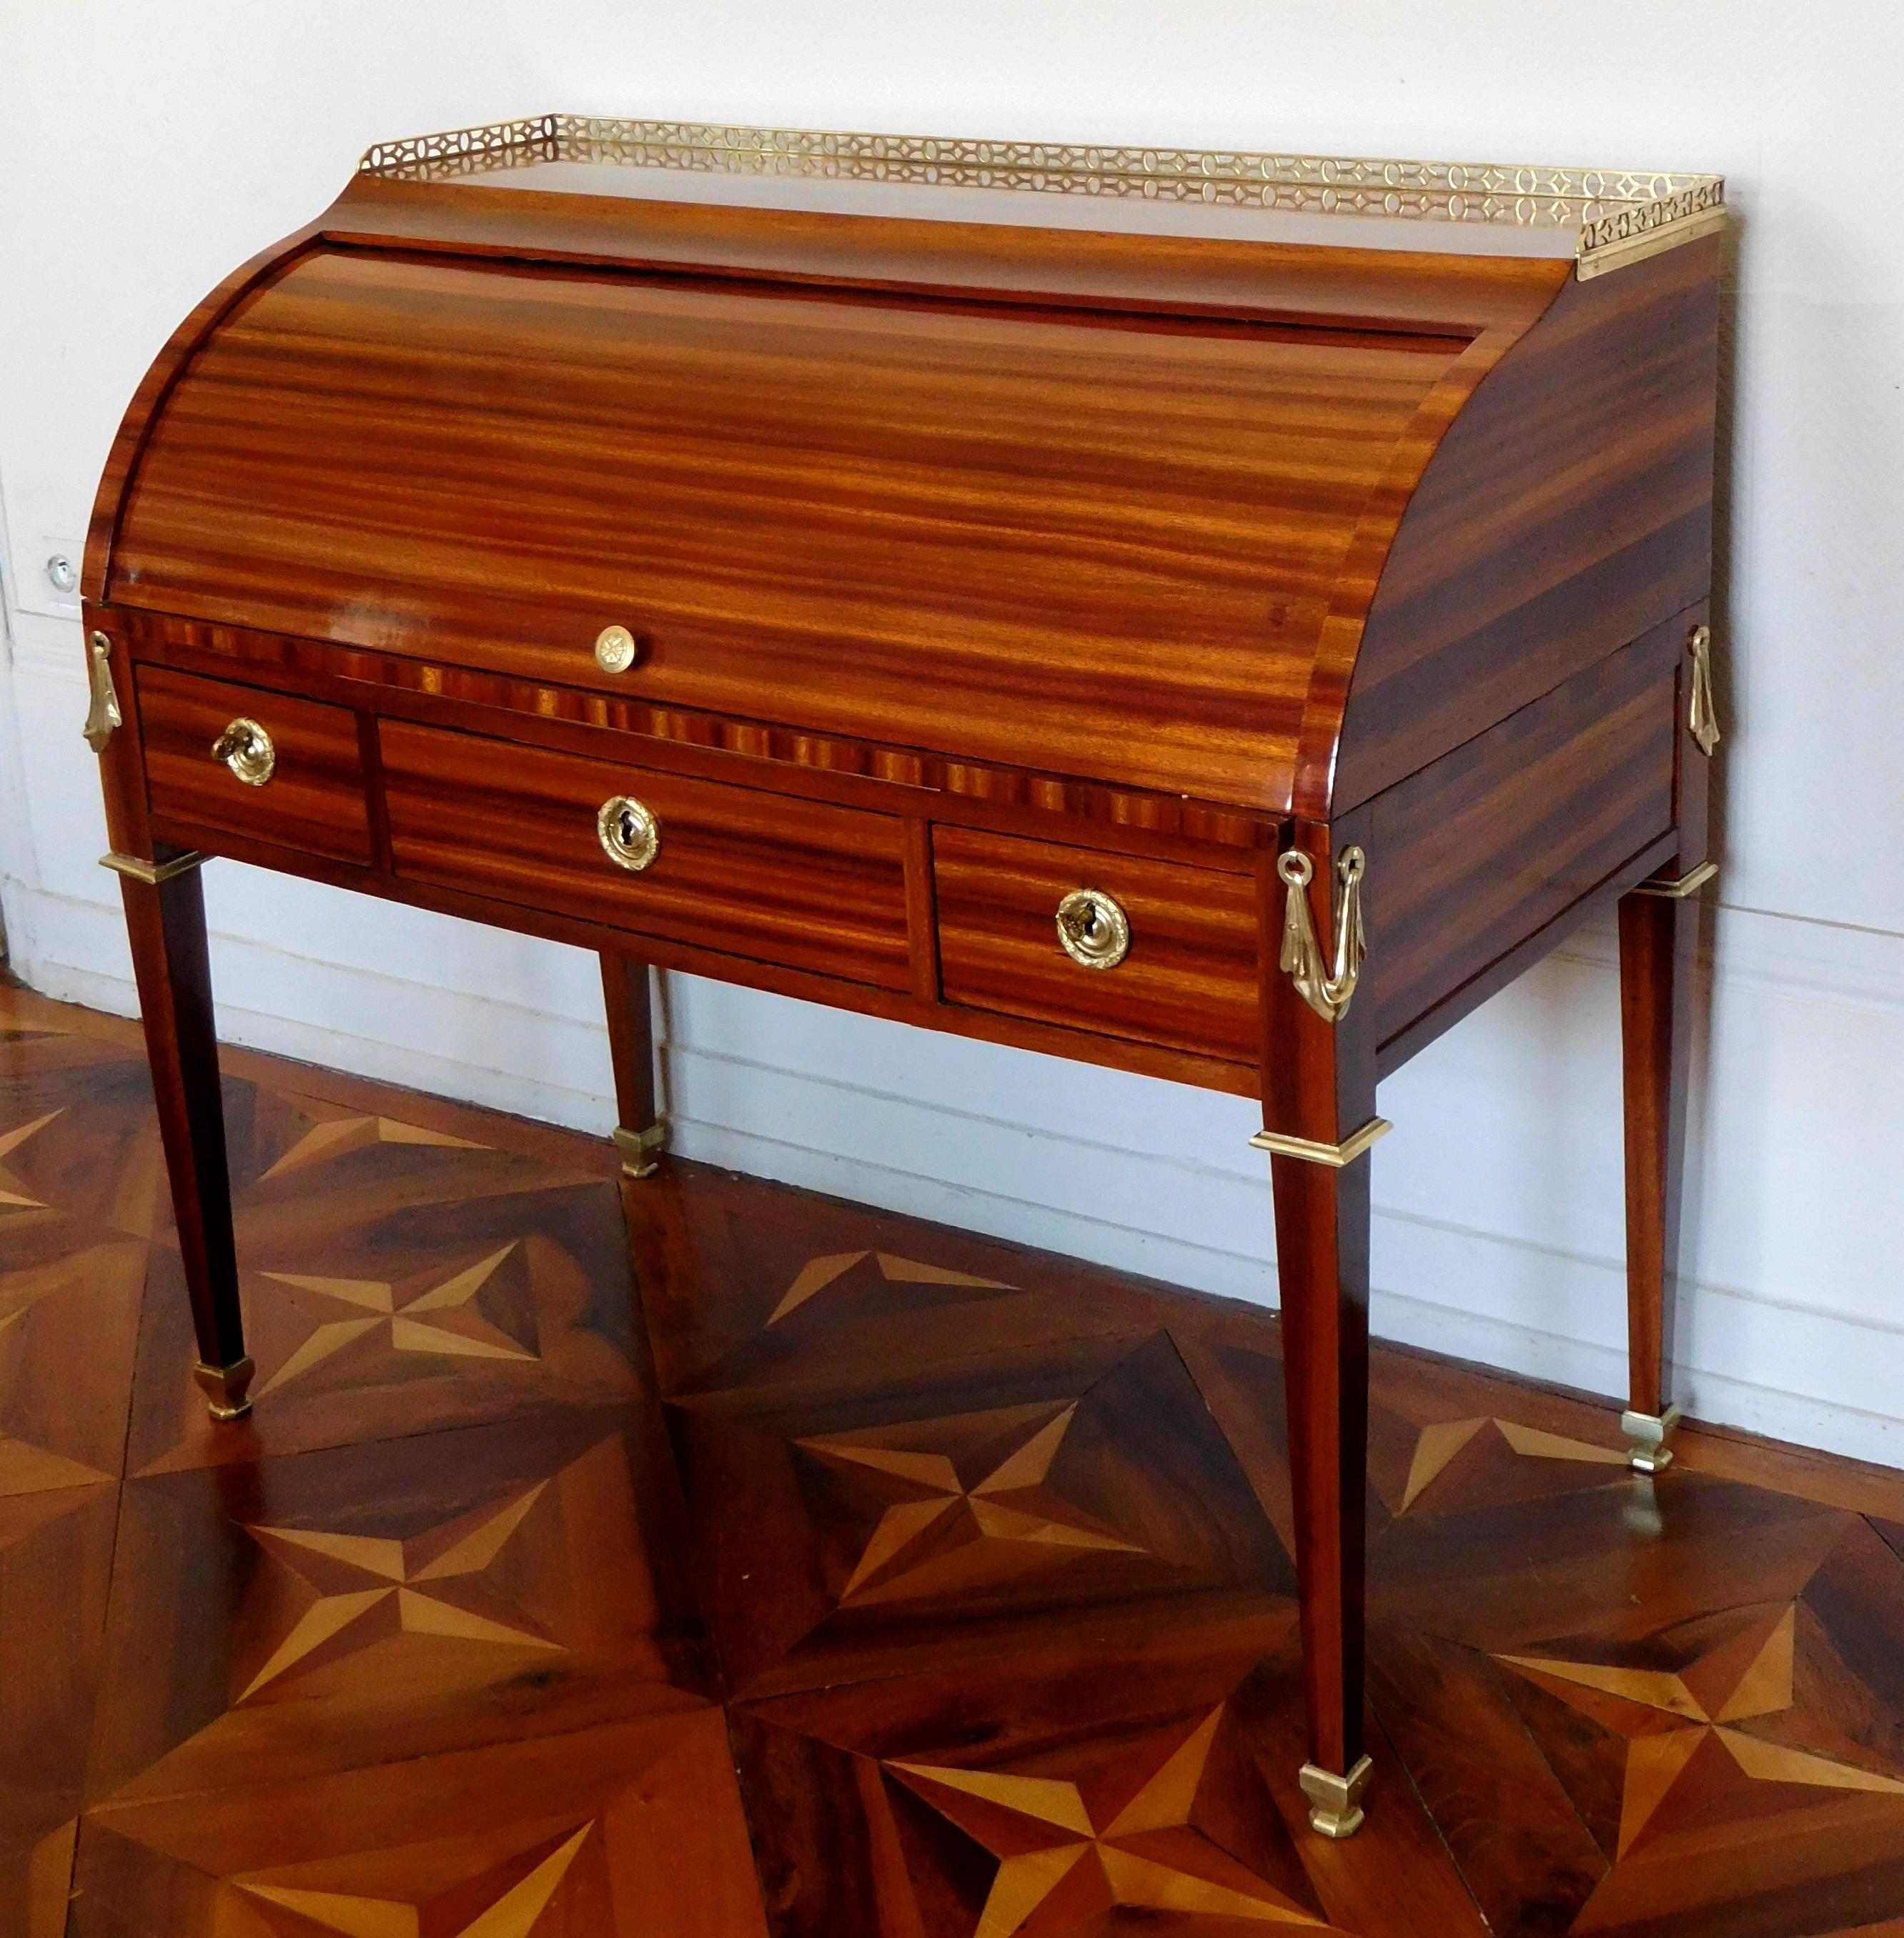 French Louis XVI Satinwood Roll Top Desk by Macret - Stamped - 18th Century circa 1780 For Sale